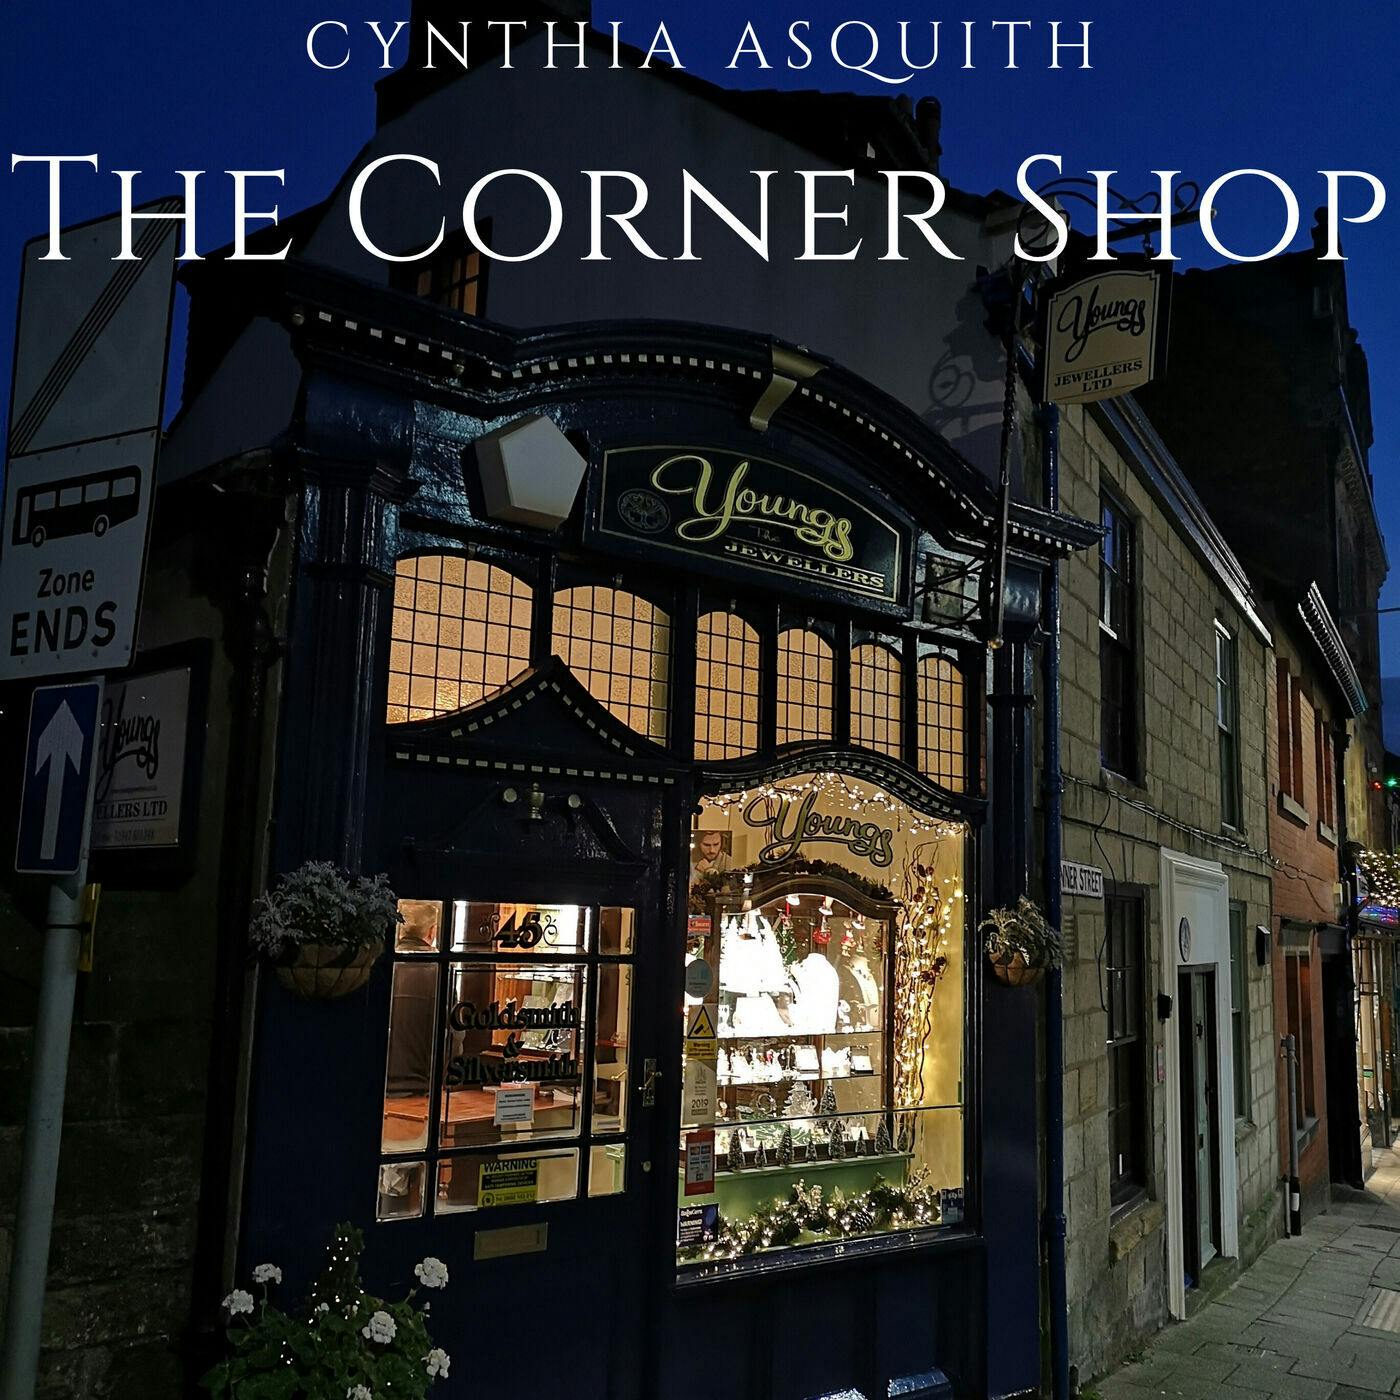 Episode 28 The Corner Shop by Cynthia Asquith